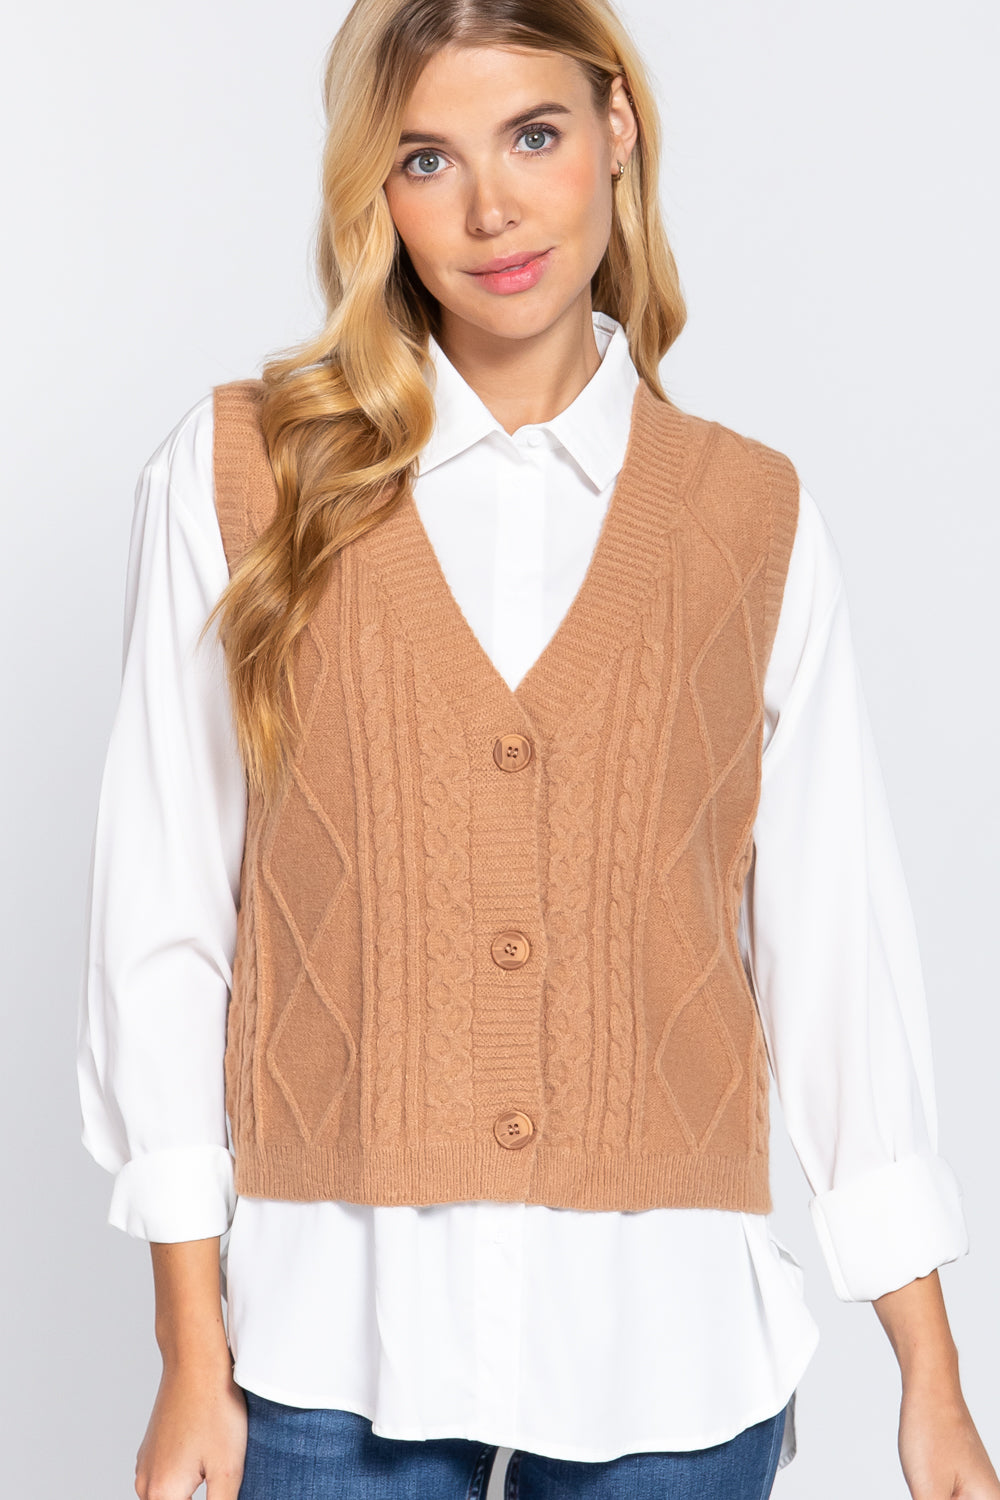 Women's  \V-neck Cable Sweater Vest Cardigan